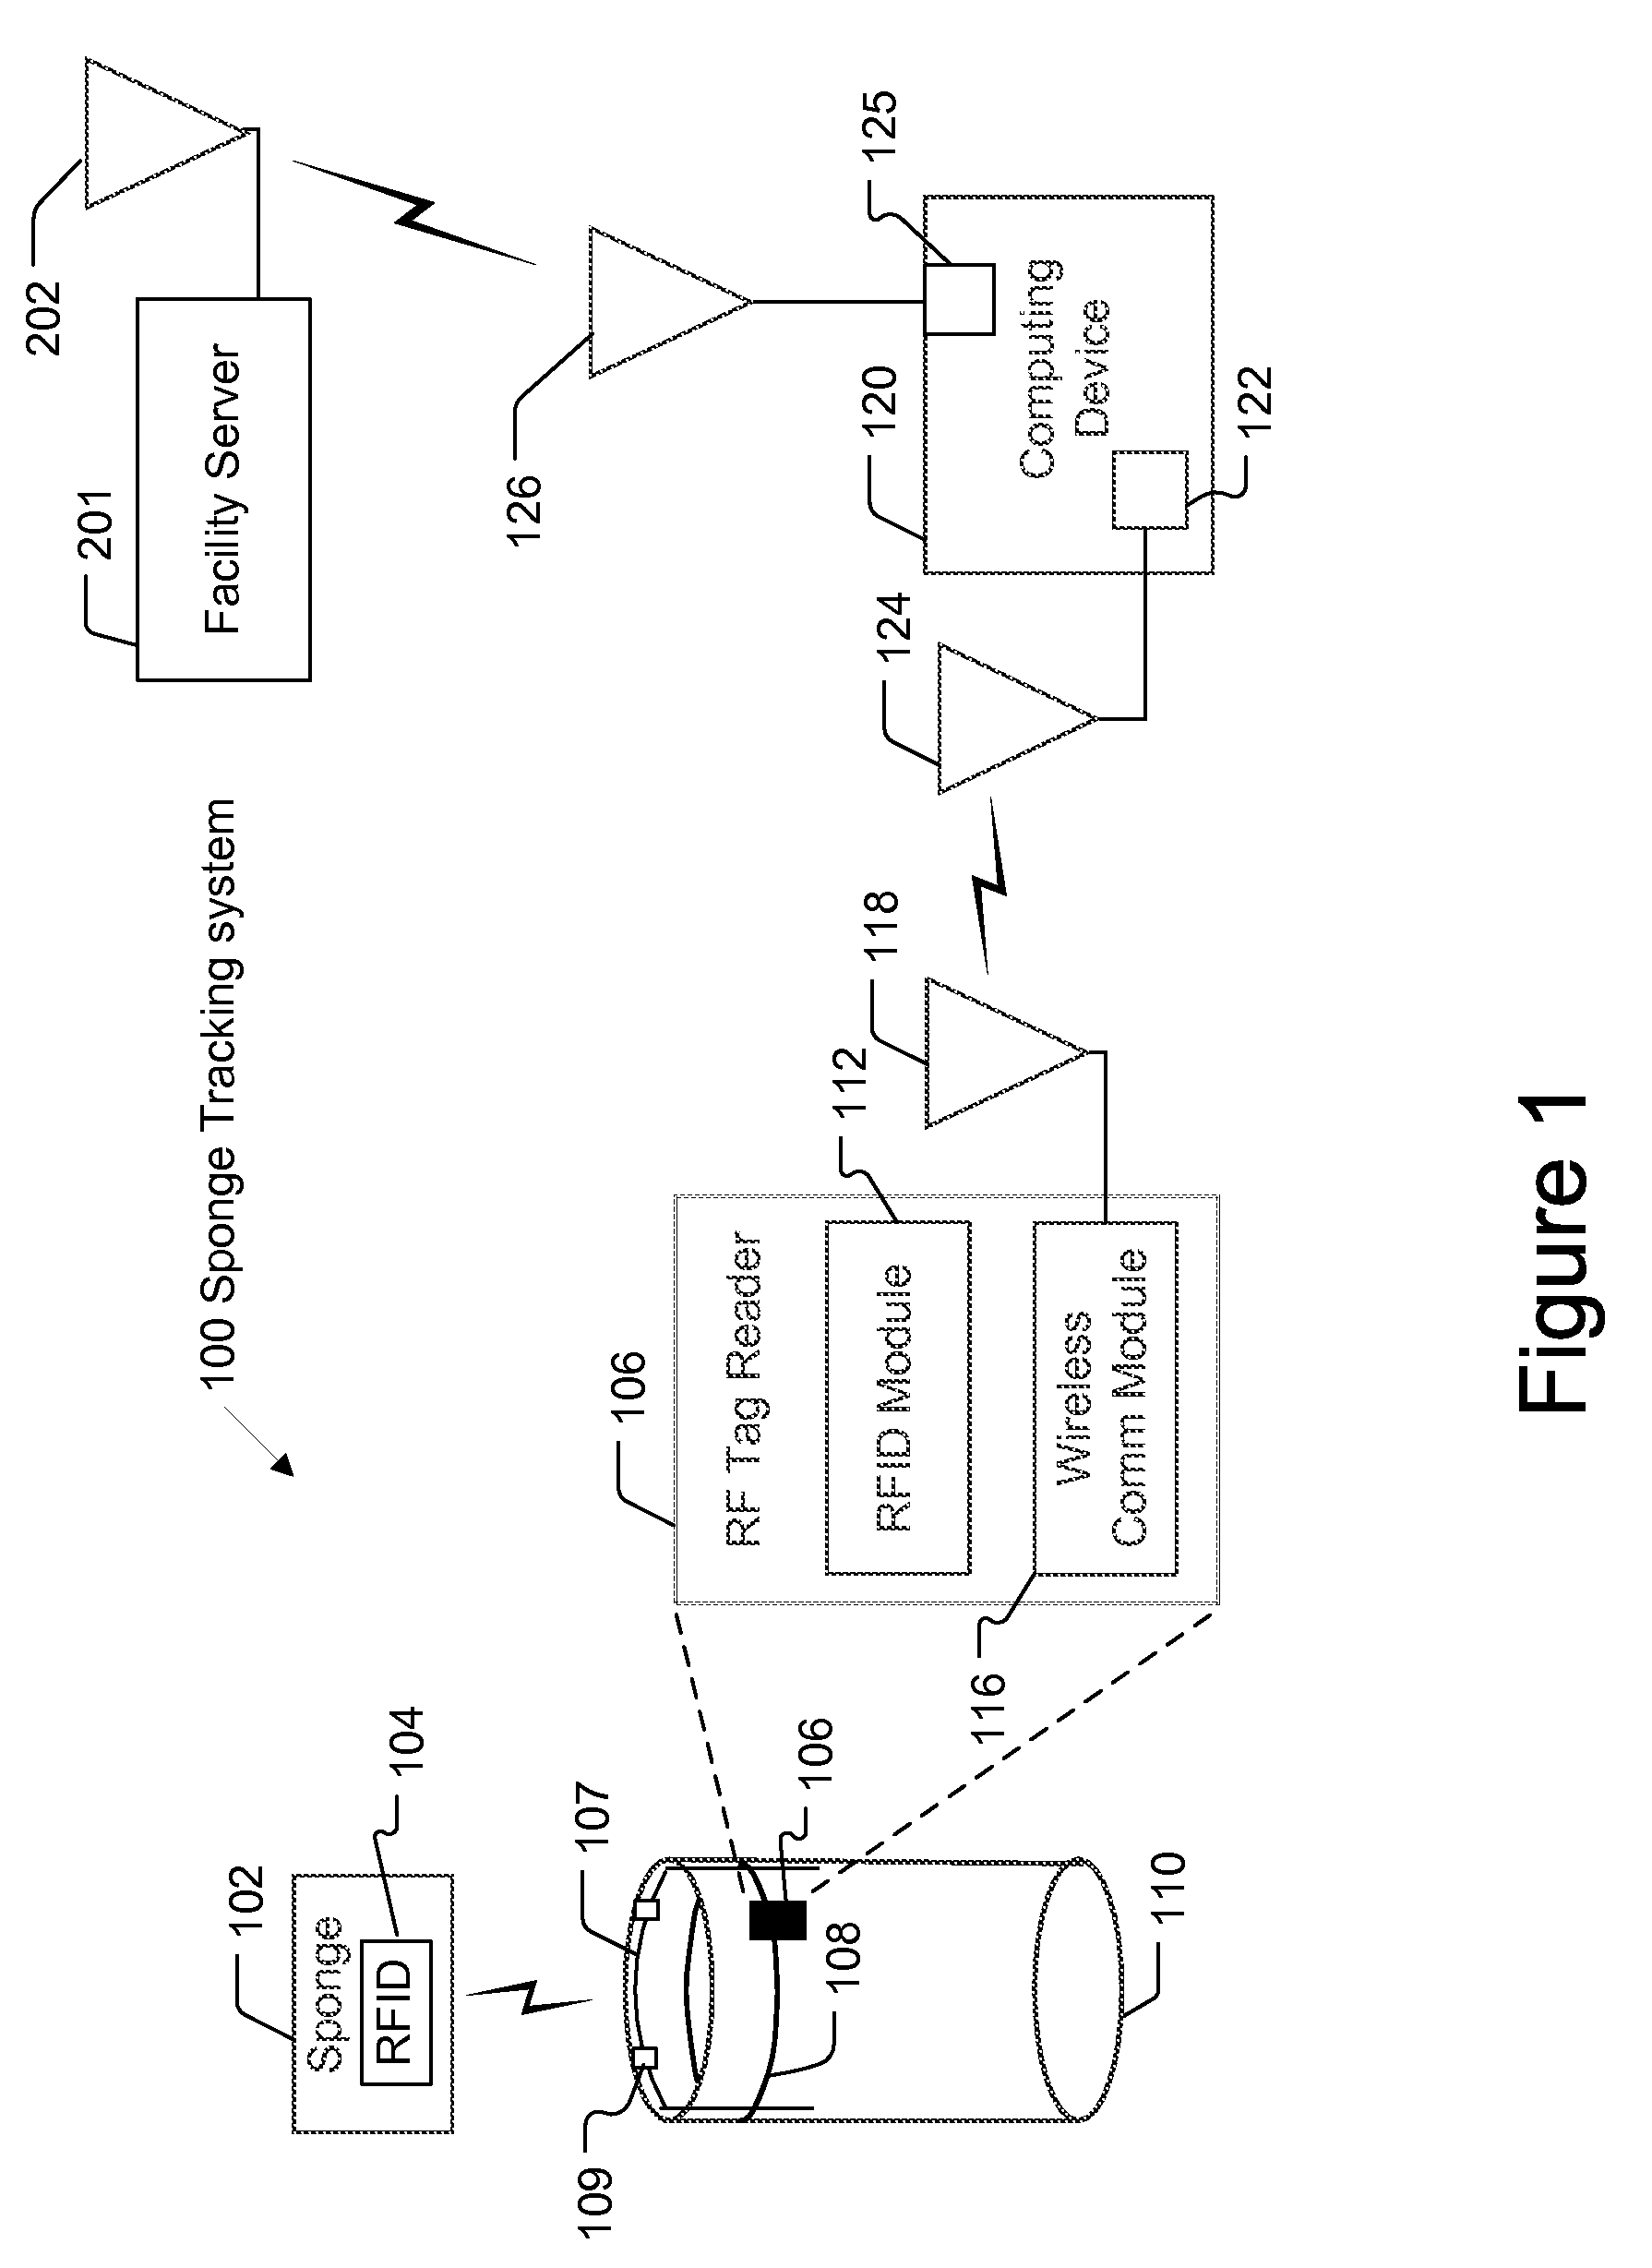 System, Method and Device for Tracking Surgical Sponges